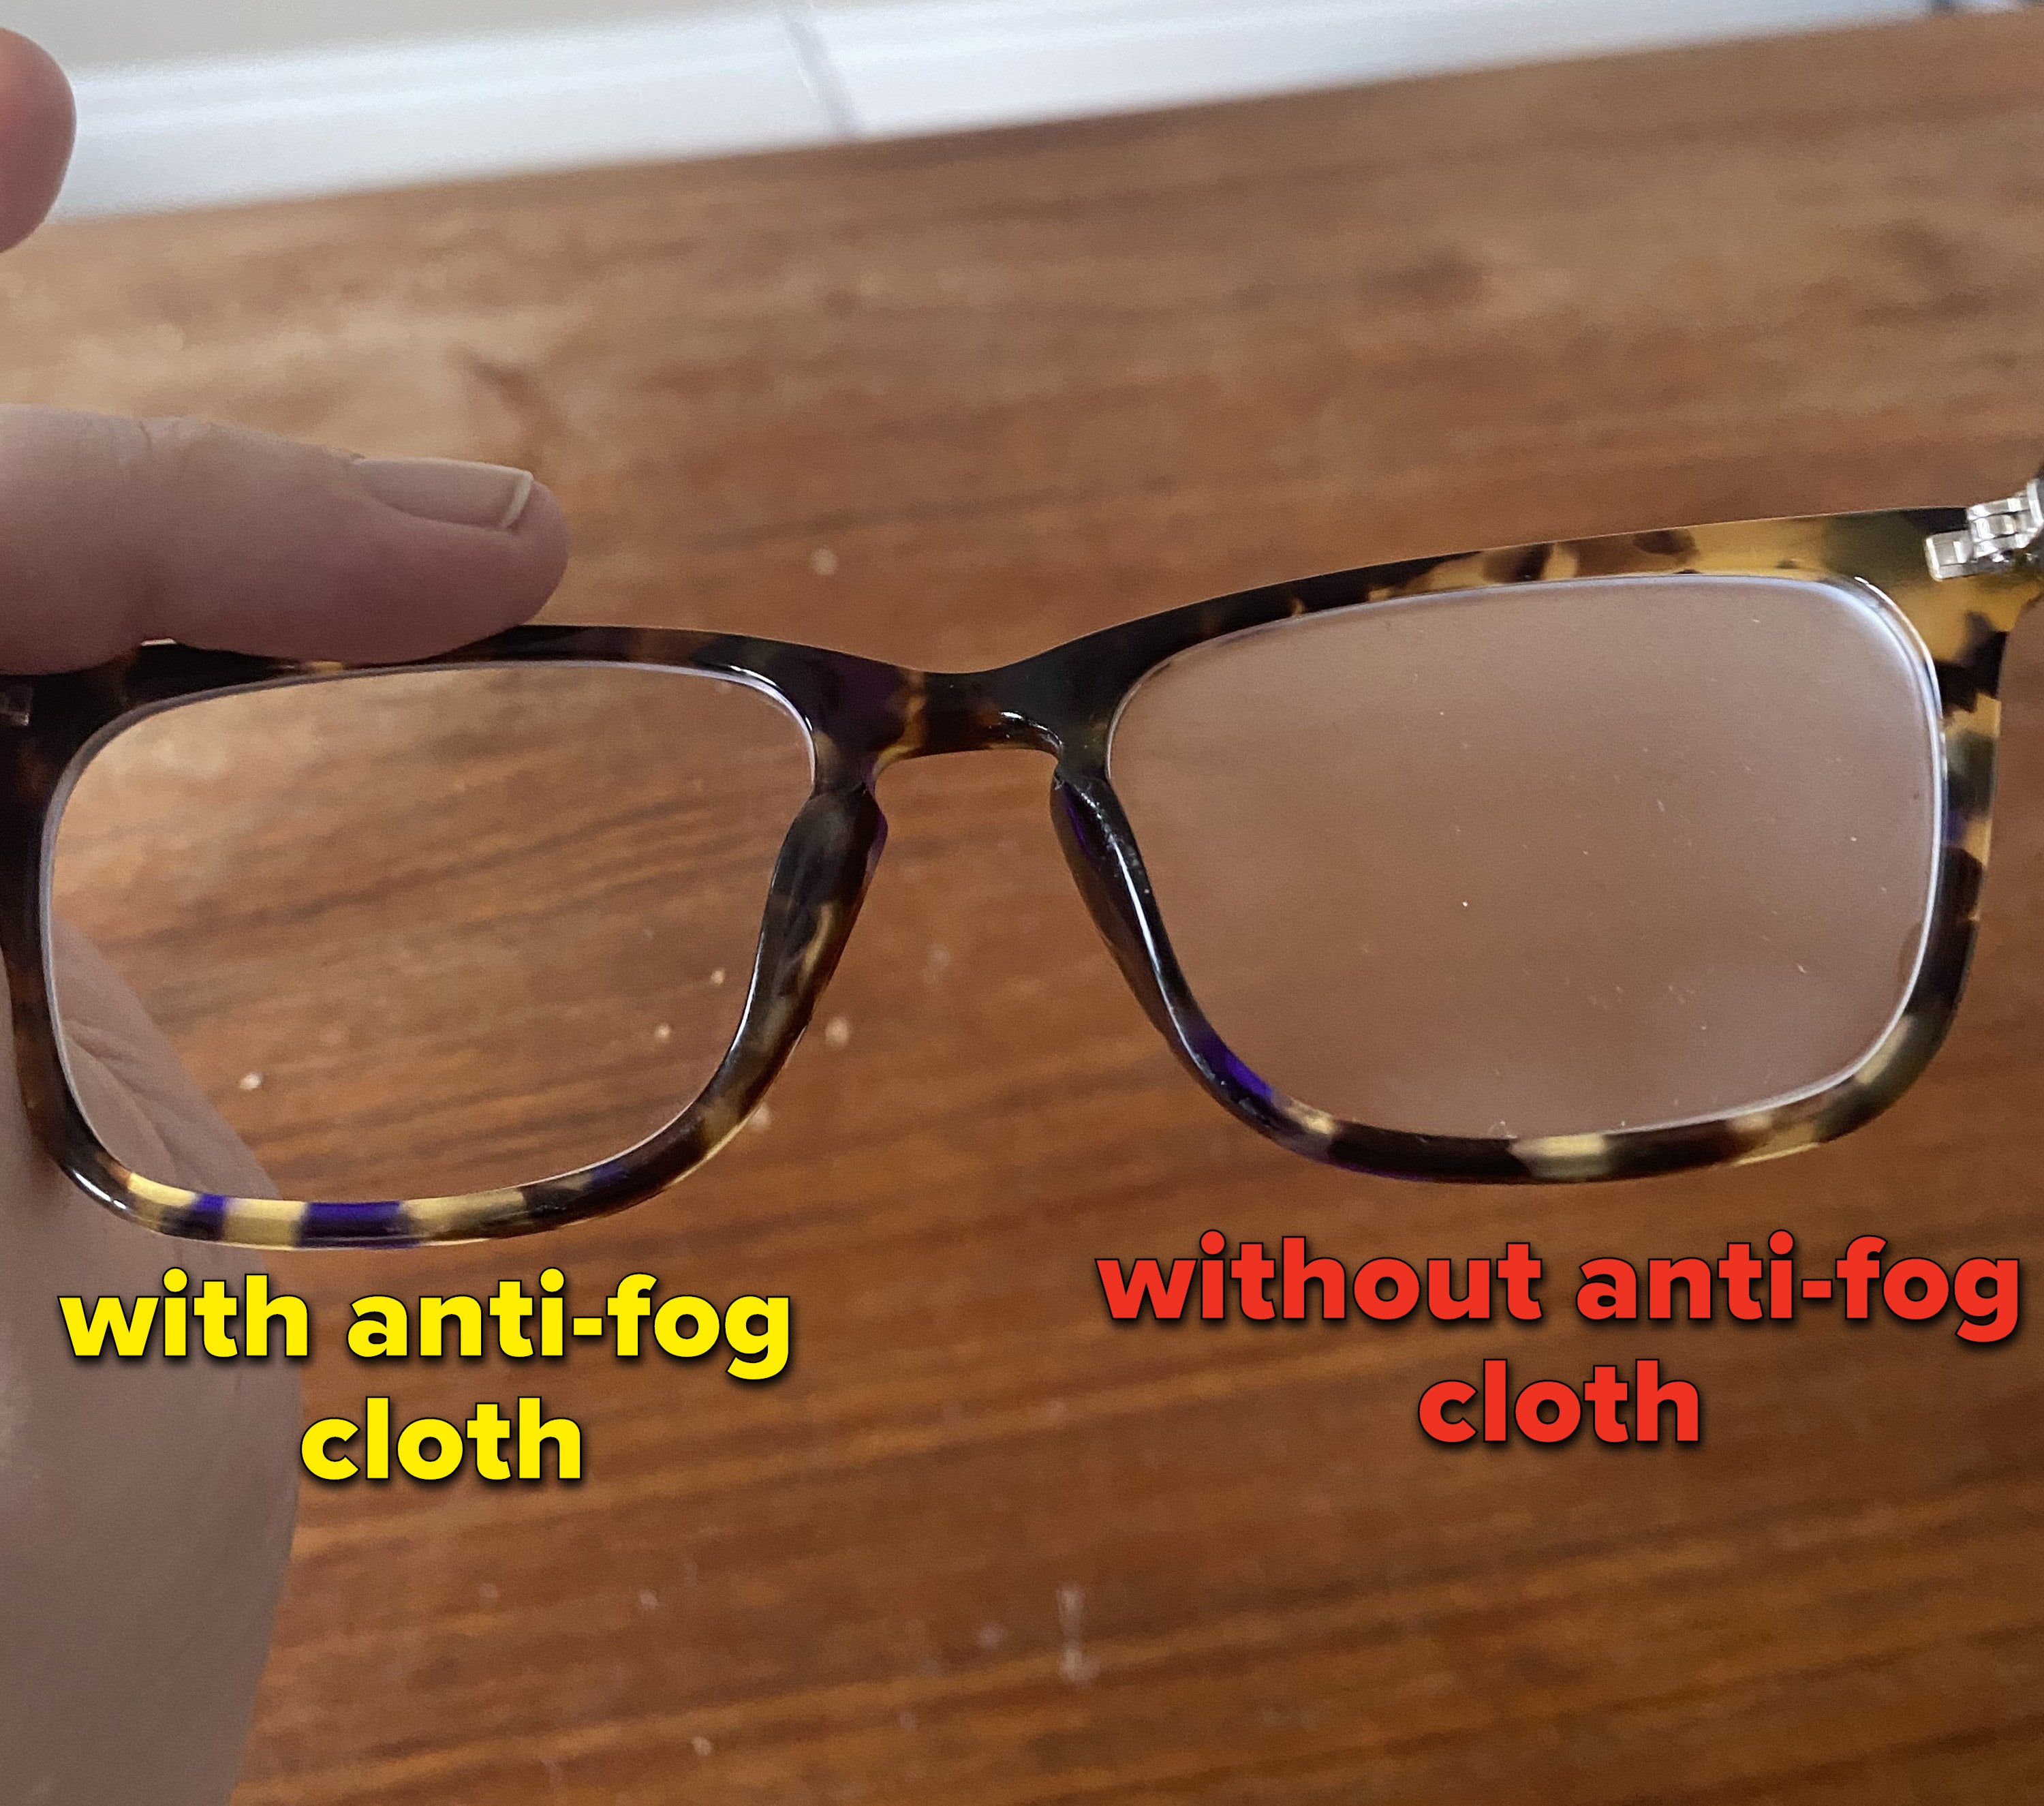 The anti-fog cloth only used on one of the lenses of Kat&#x27;s glasses, and the lens it was not used on is fogged up while the one is is used on is totally clear